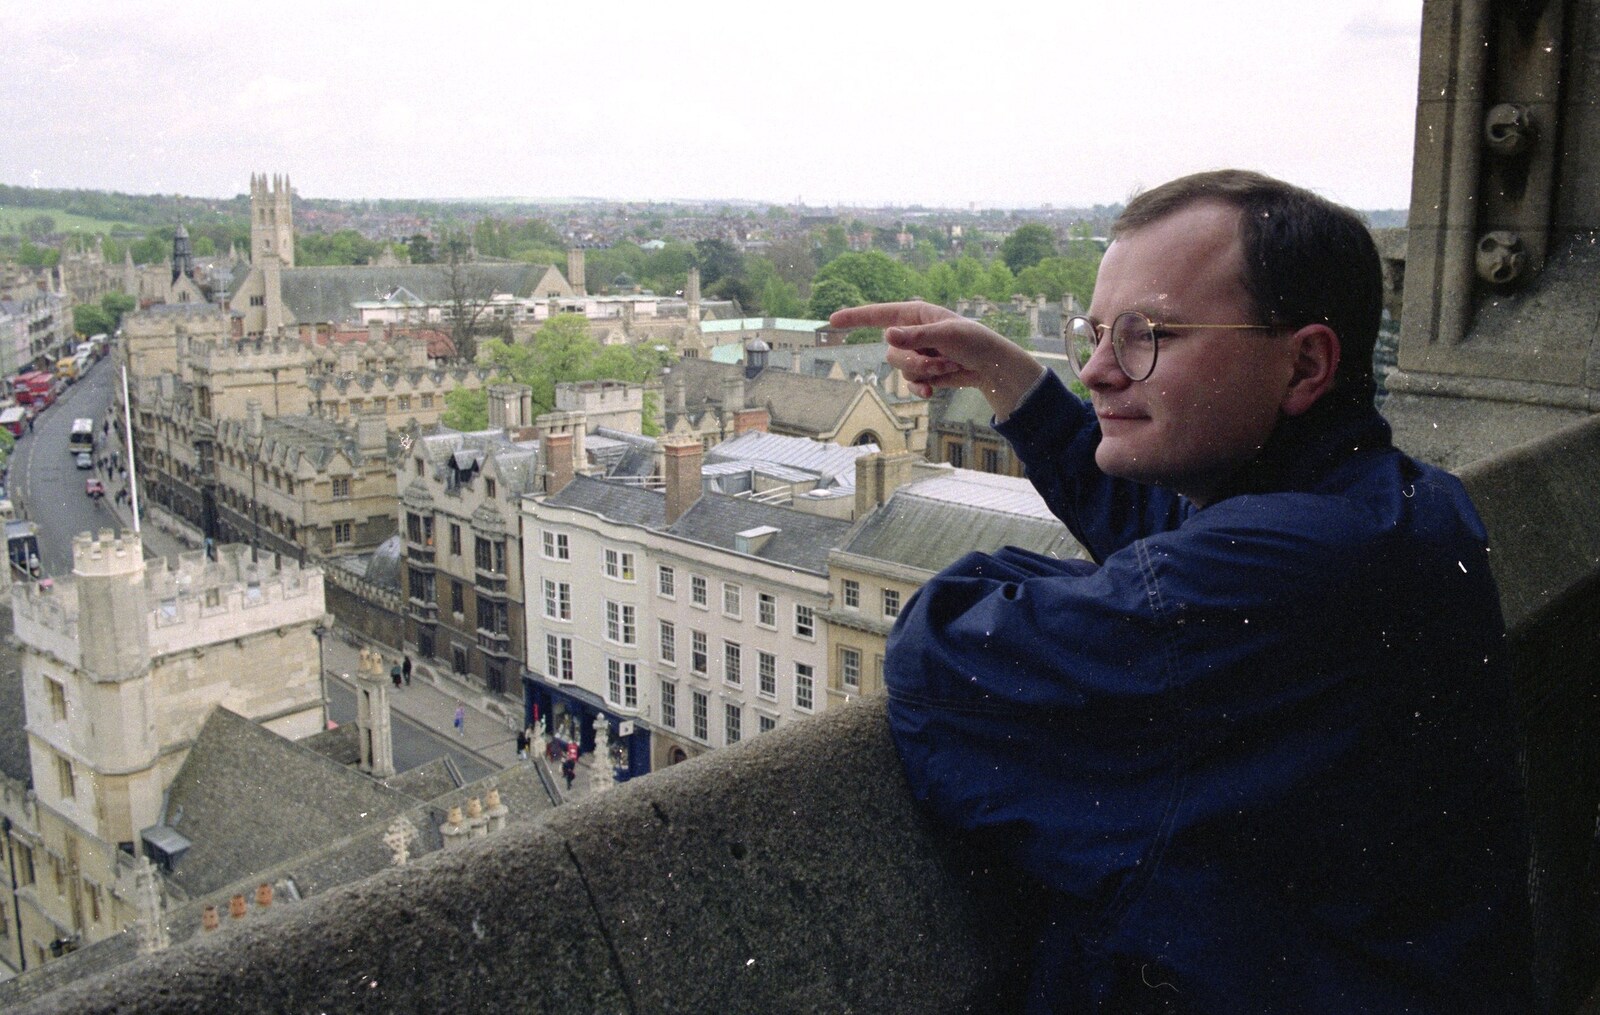 Hamish's Oxford Party, Oxfordshire - 25th April 1992: Hamish looks out over Oxford